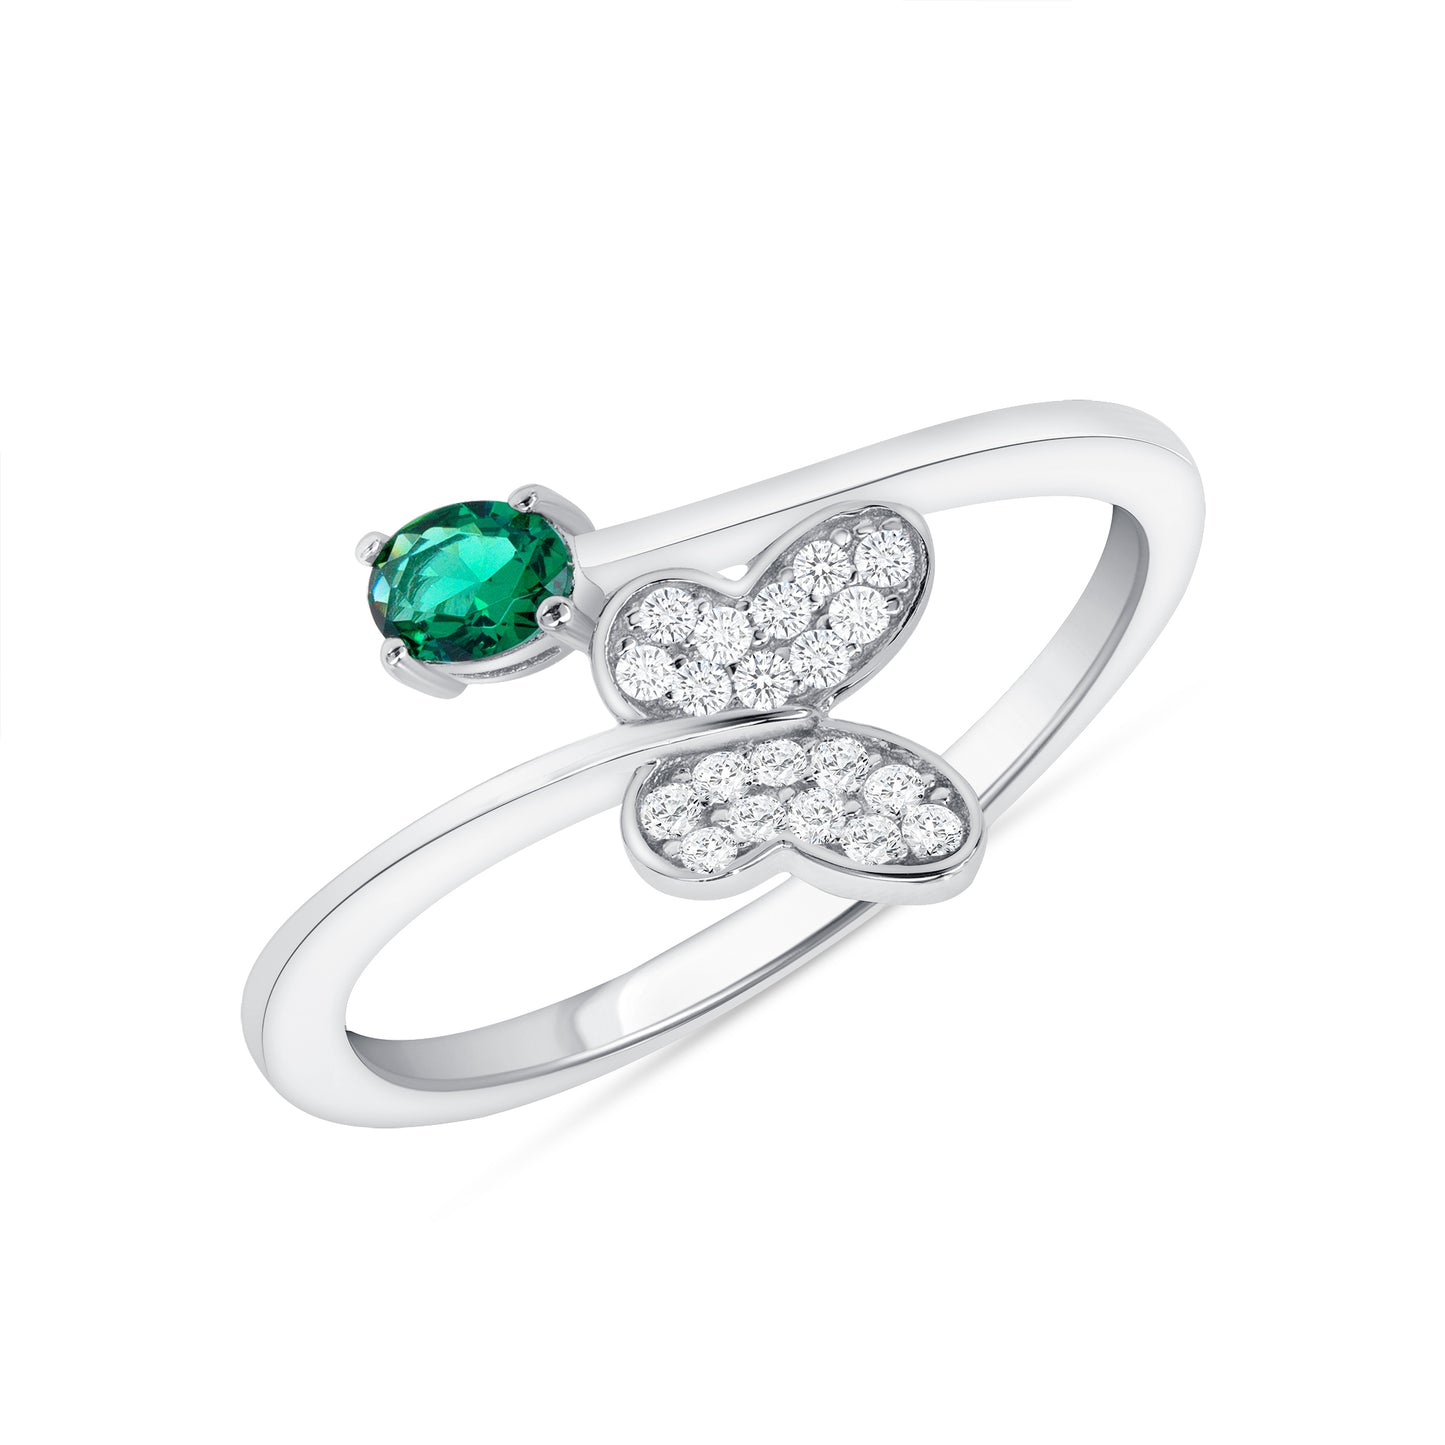 Silver 925 Rhodium Plated Green Emerald Cubic Zirconia Round & Butterfly Ring. BR15270GRN